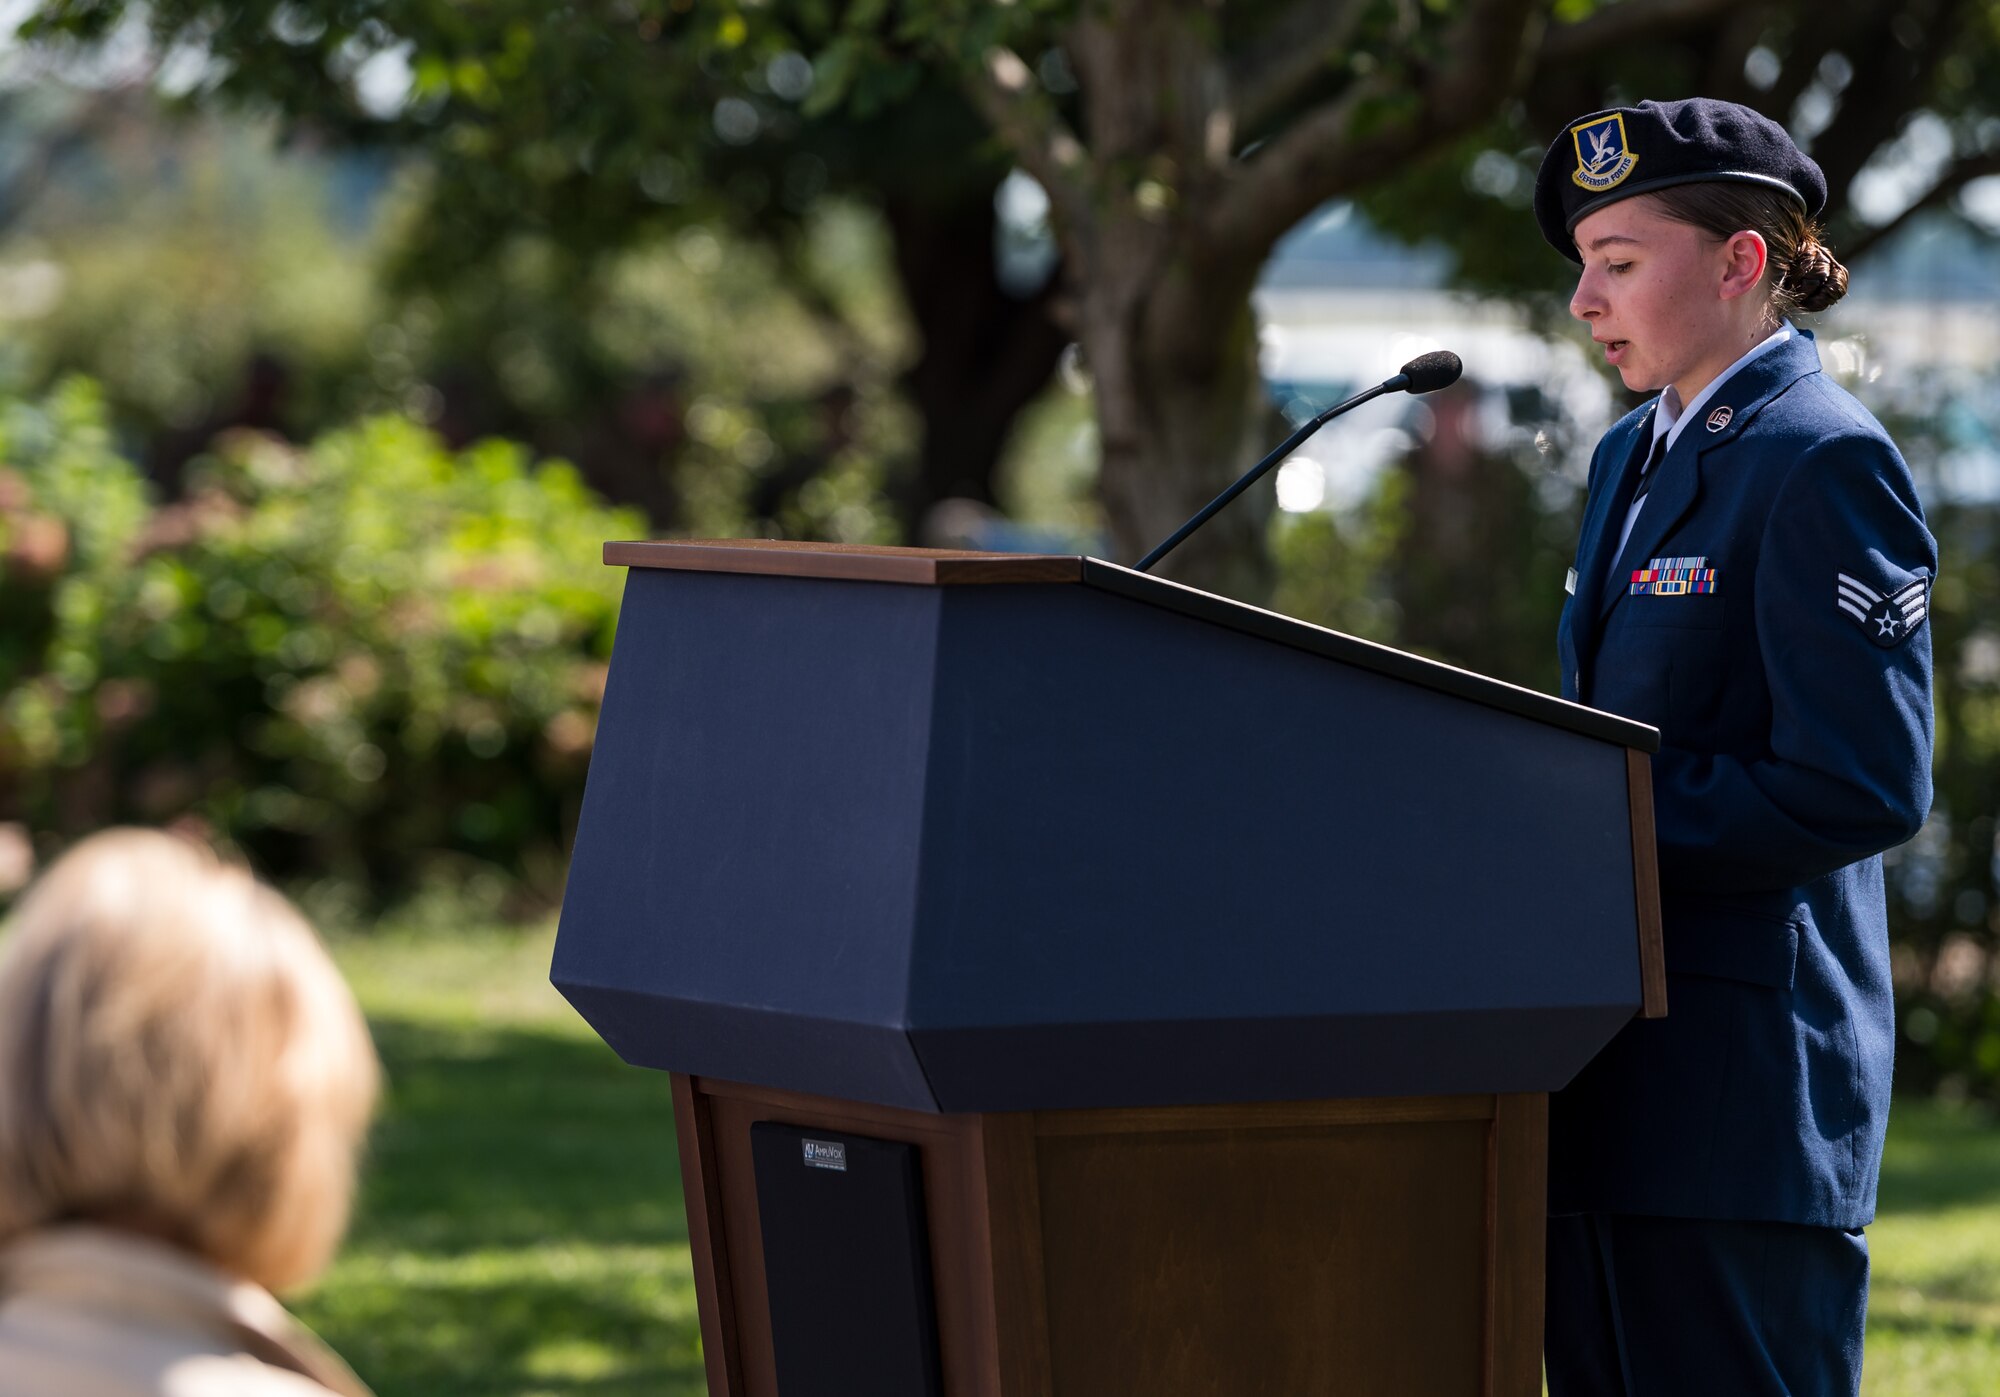 Senior Airman Lindsay Wells, 436th Security Forces Squadron response force member, reads the Security Forces Prayer during the 20th Anniversary 9/11 Remembrance Ceremony held at the Air Mobility Command Museum’s 9/11 Memorial on Dover Air Force Base, Delaware, Sept. 11, 2021. Wells read the prayer to honor the 71 law enforcement officers who died while responding to the terrorist attacks on the World Trade Center in New York Sept. 11, 2001.(U.S. Air Force photo by Roland Balik)